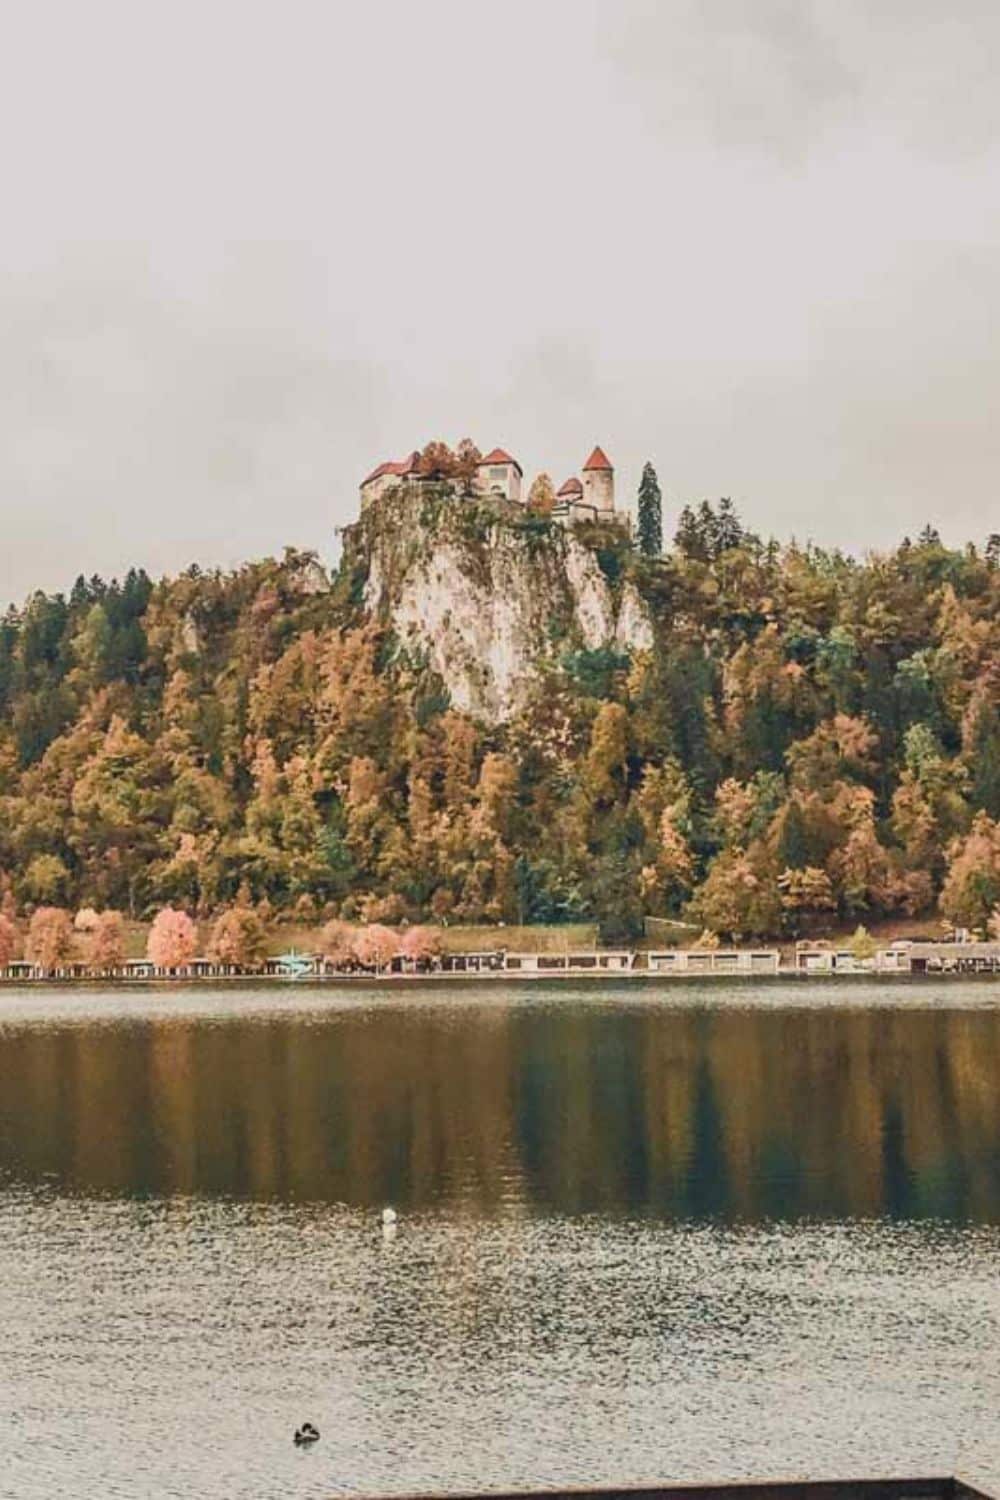 Winter view of the medieval Bled Castle perched atop a steep cliff overlooking the calm waters of Lake Bled, a popular winter destination for history enthusiasts.